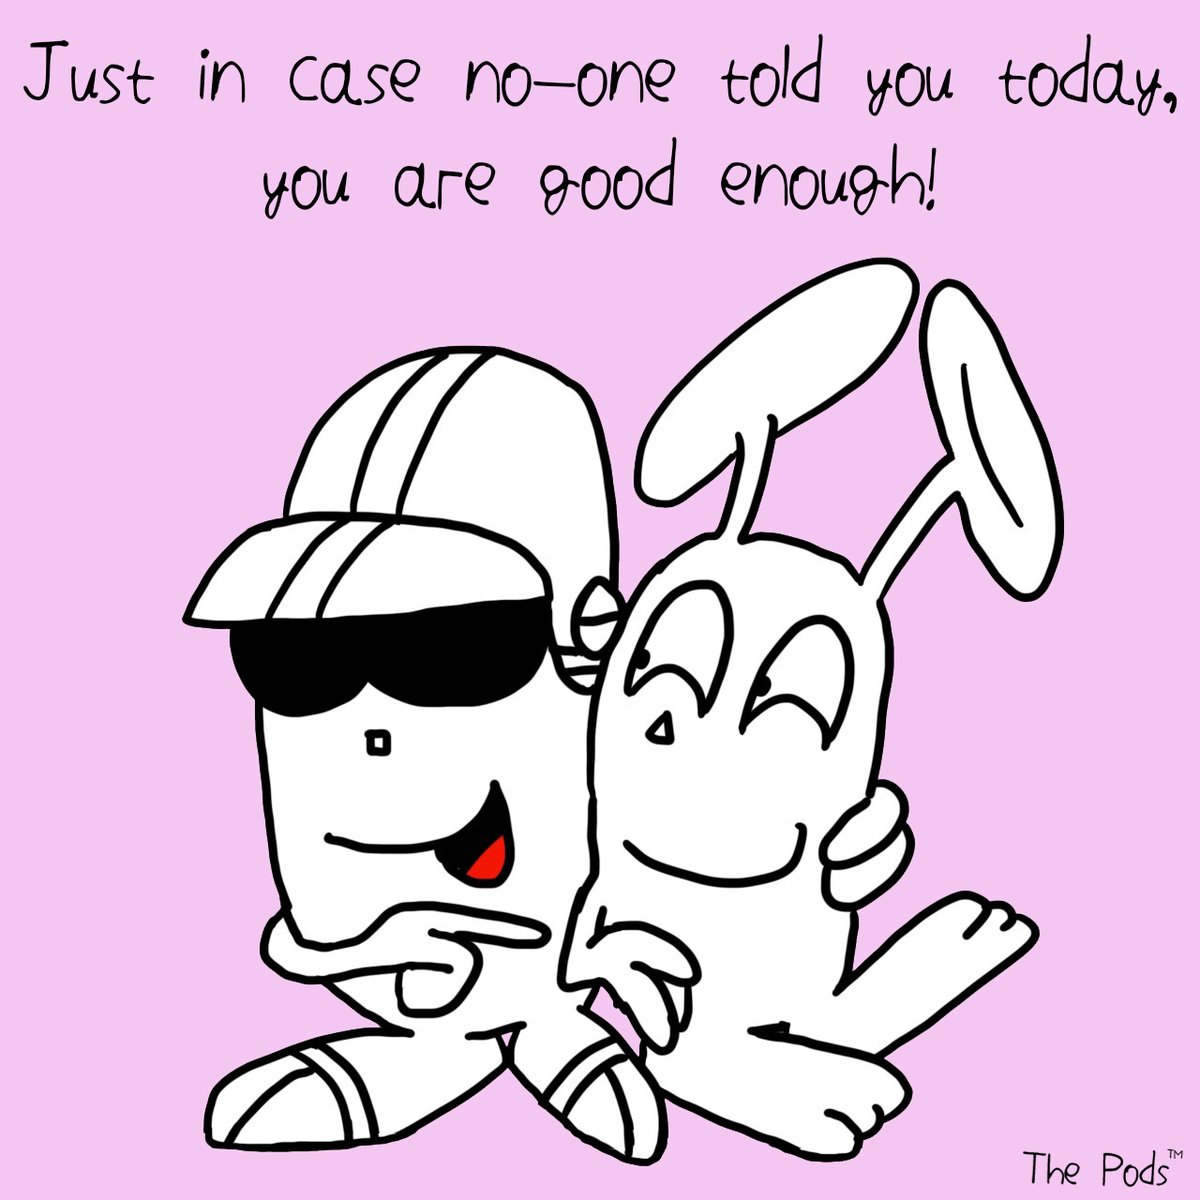 Yes you are!
#youcandoit #makeithappen #positive #positivity #positivevibes #beawesome #happyday #happydays #awesome #meetthepods #thepods #spypod #bunnypod #quote #quoteoftheday #quotes #motivationalquote #sparkle